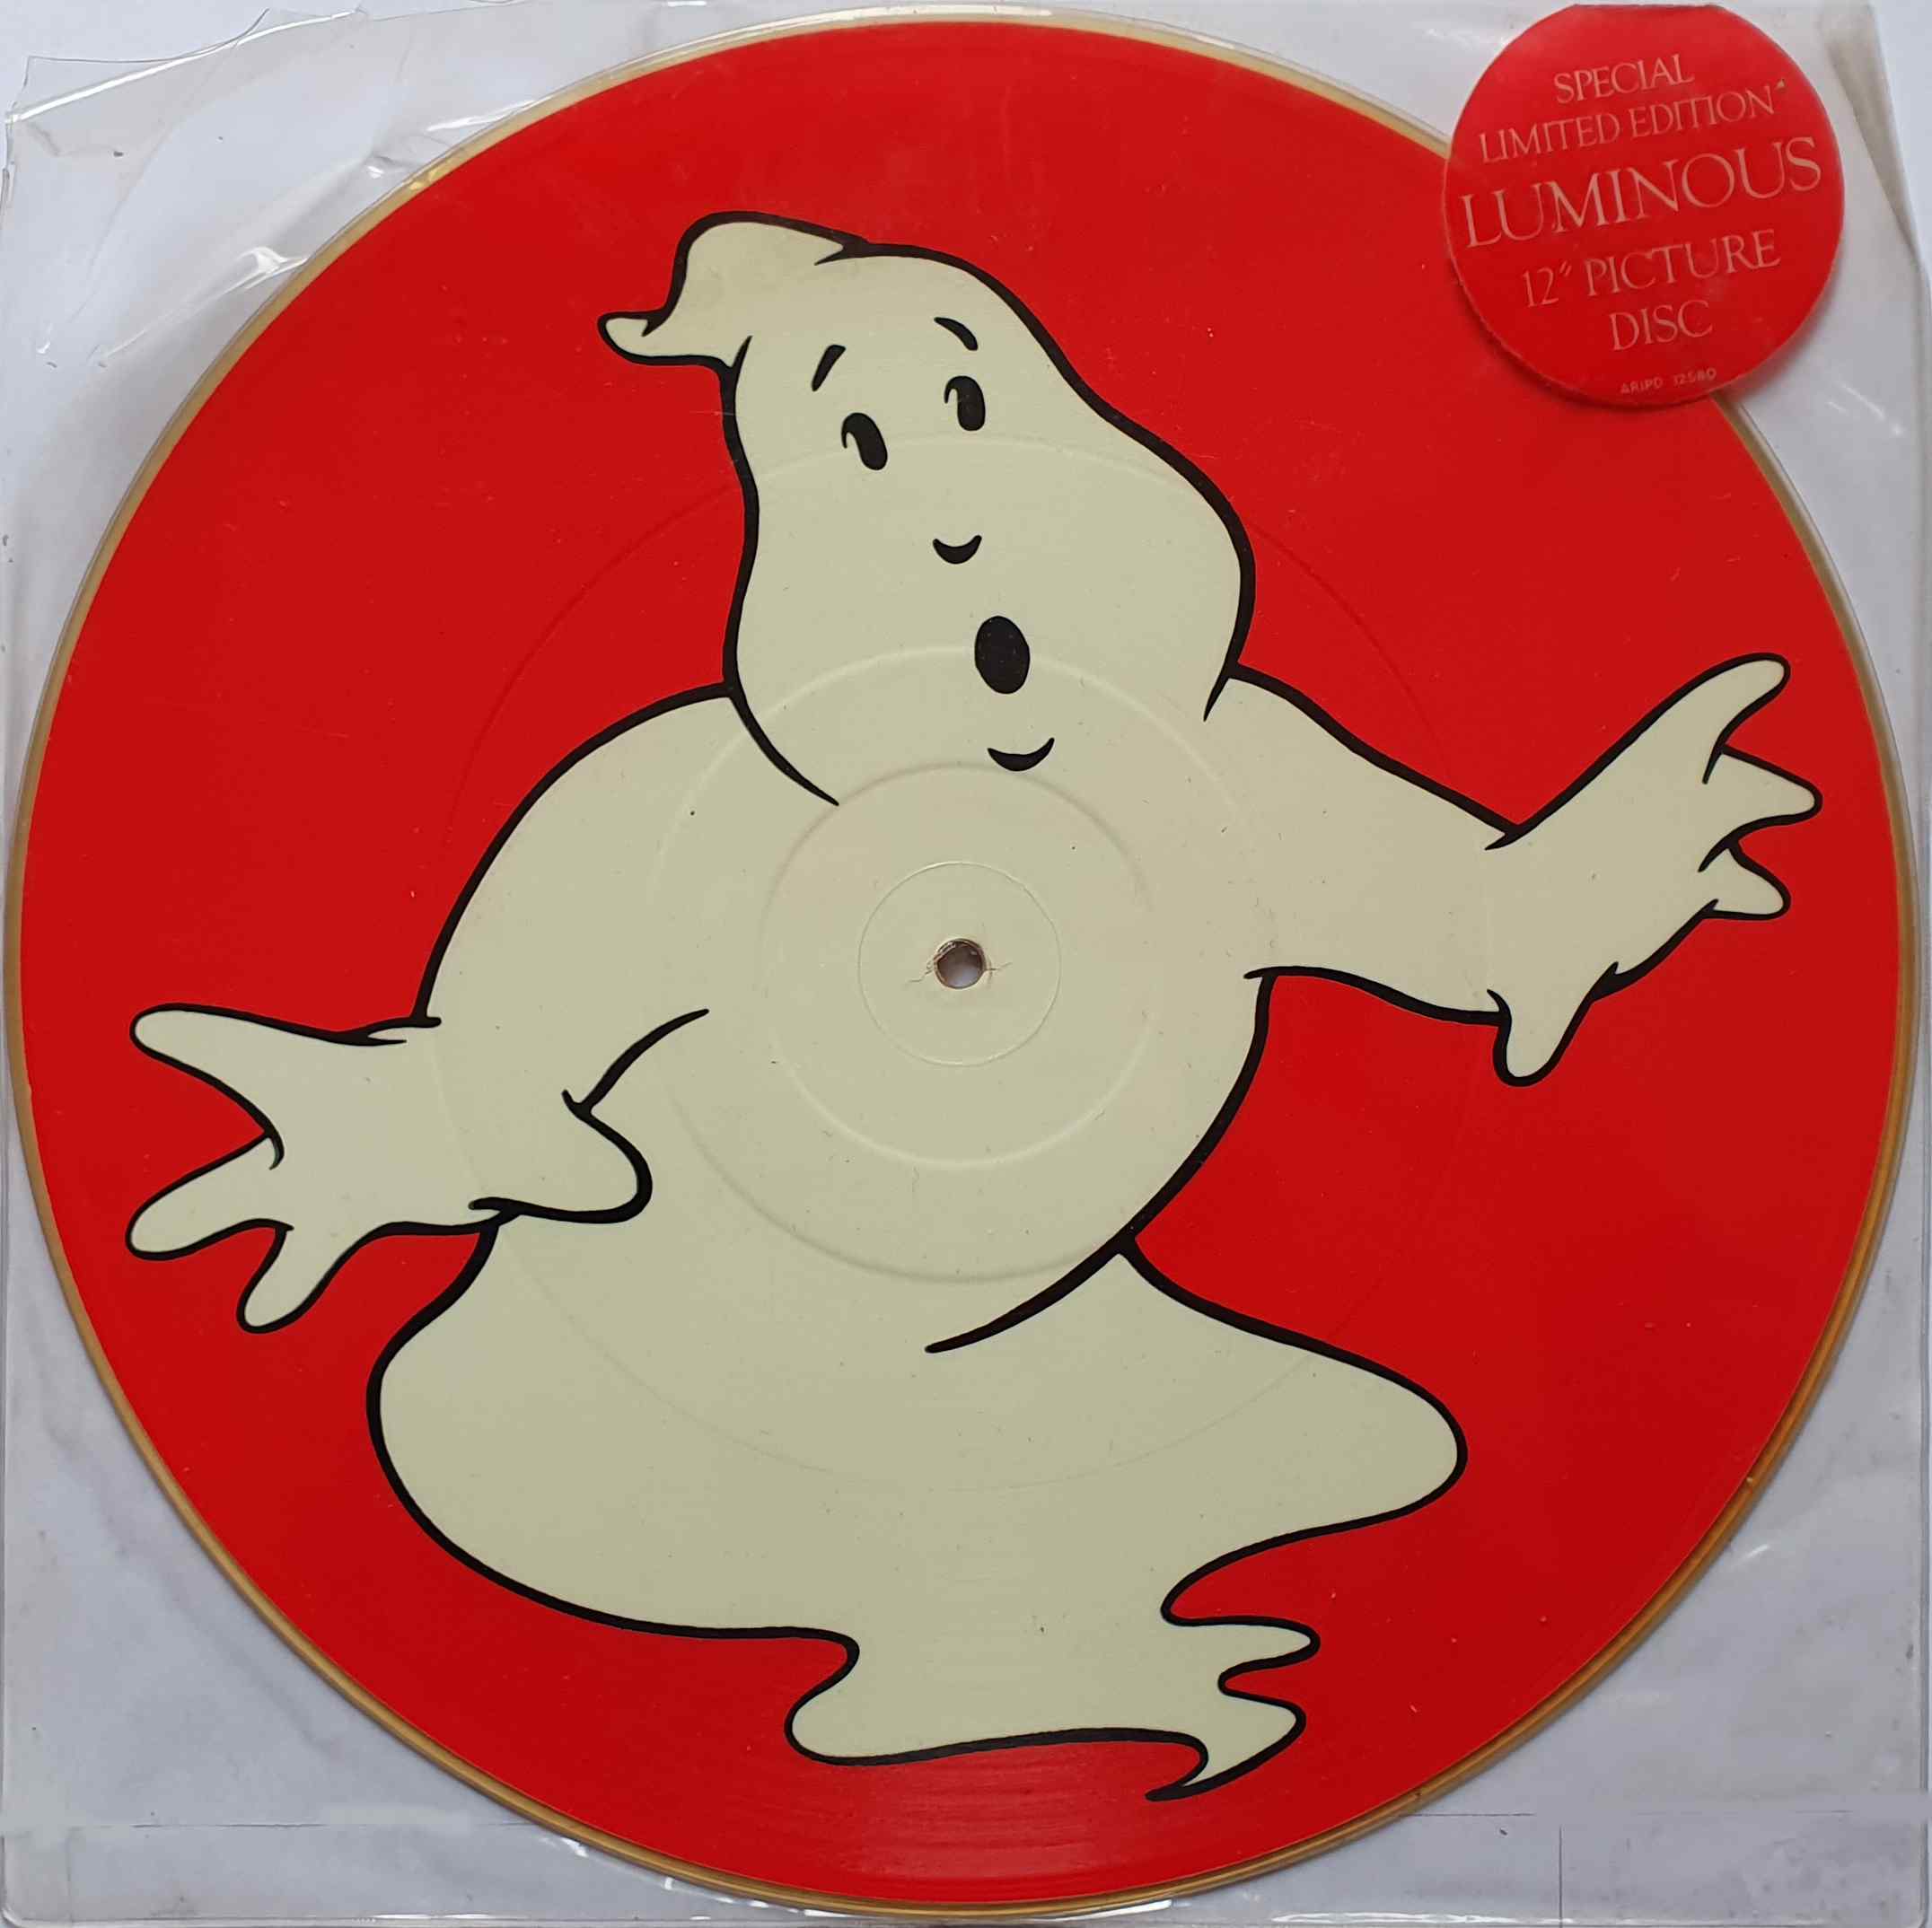 Picture of ARIPD 12580 Ghostbusters (Special limited edition - Luminous) by artist Ray Parker Junior 